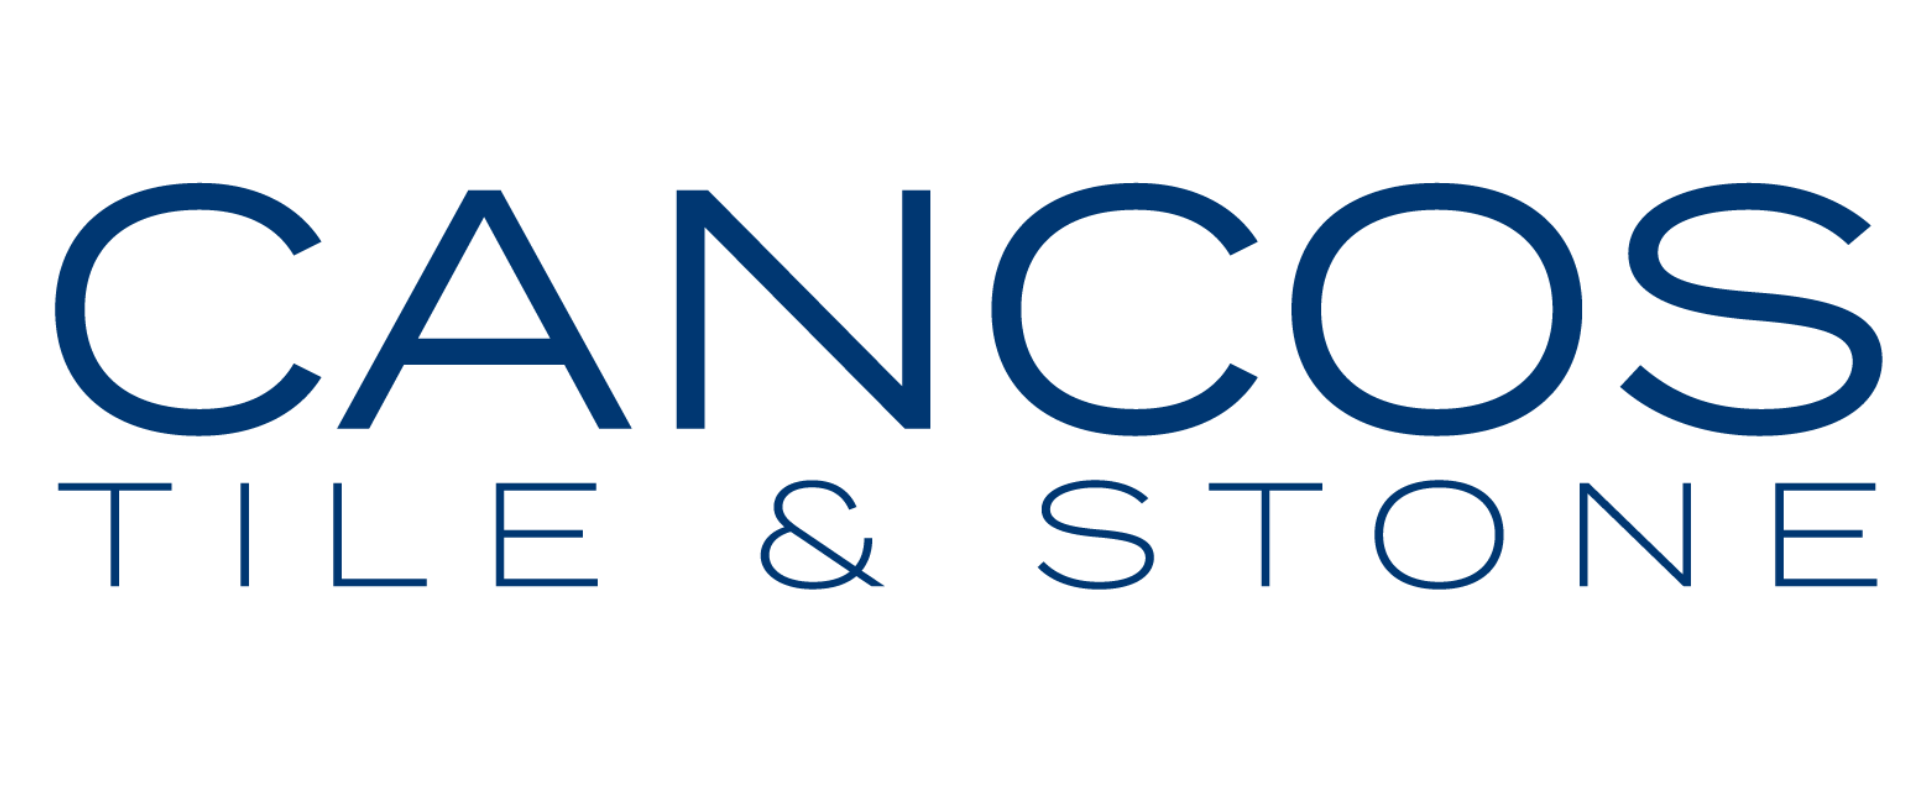 Cancos Tile and Stone